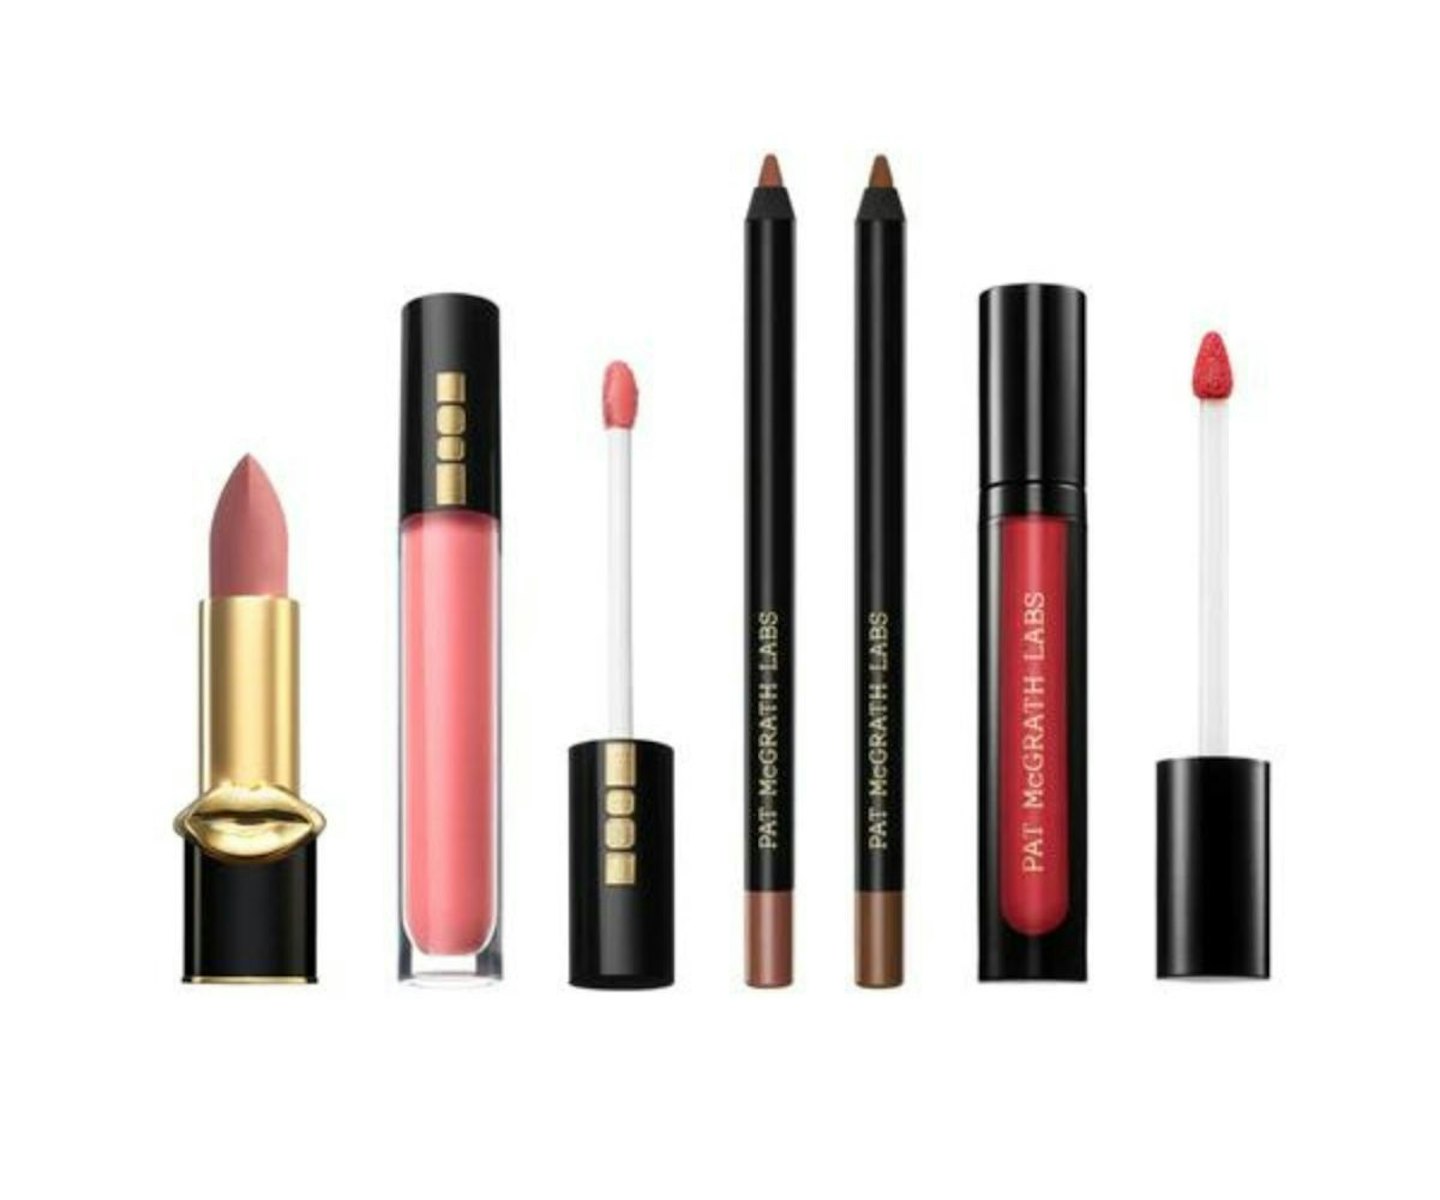 The ‘Taylor-Made’ Lip Duos Kit